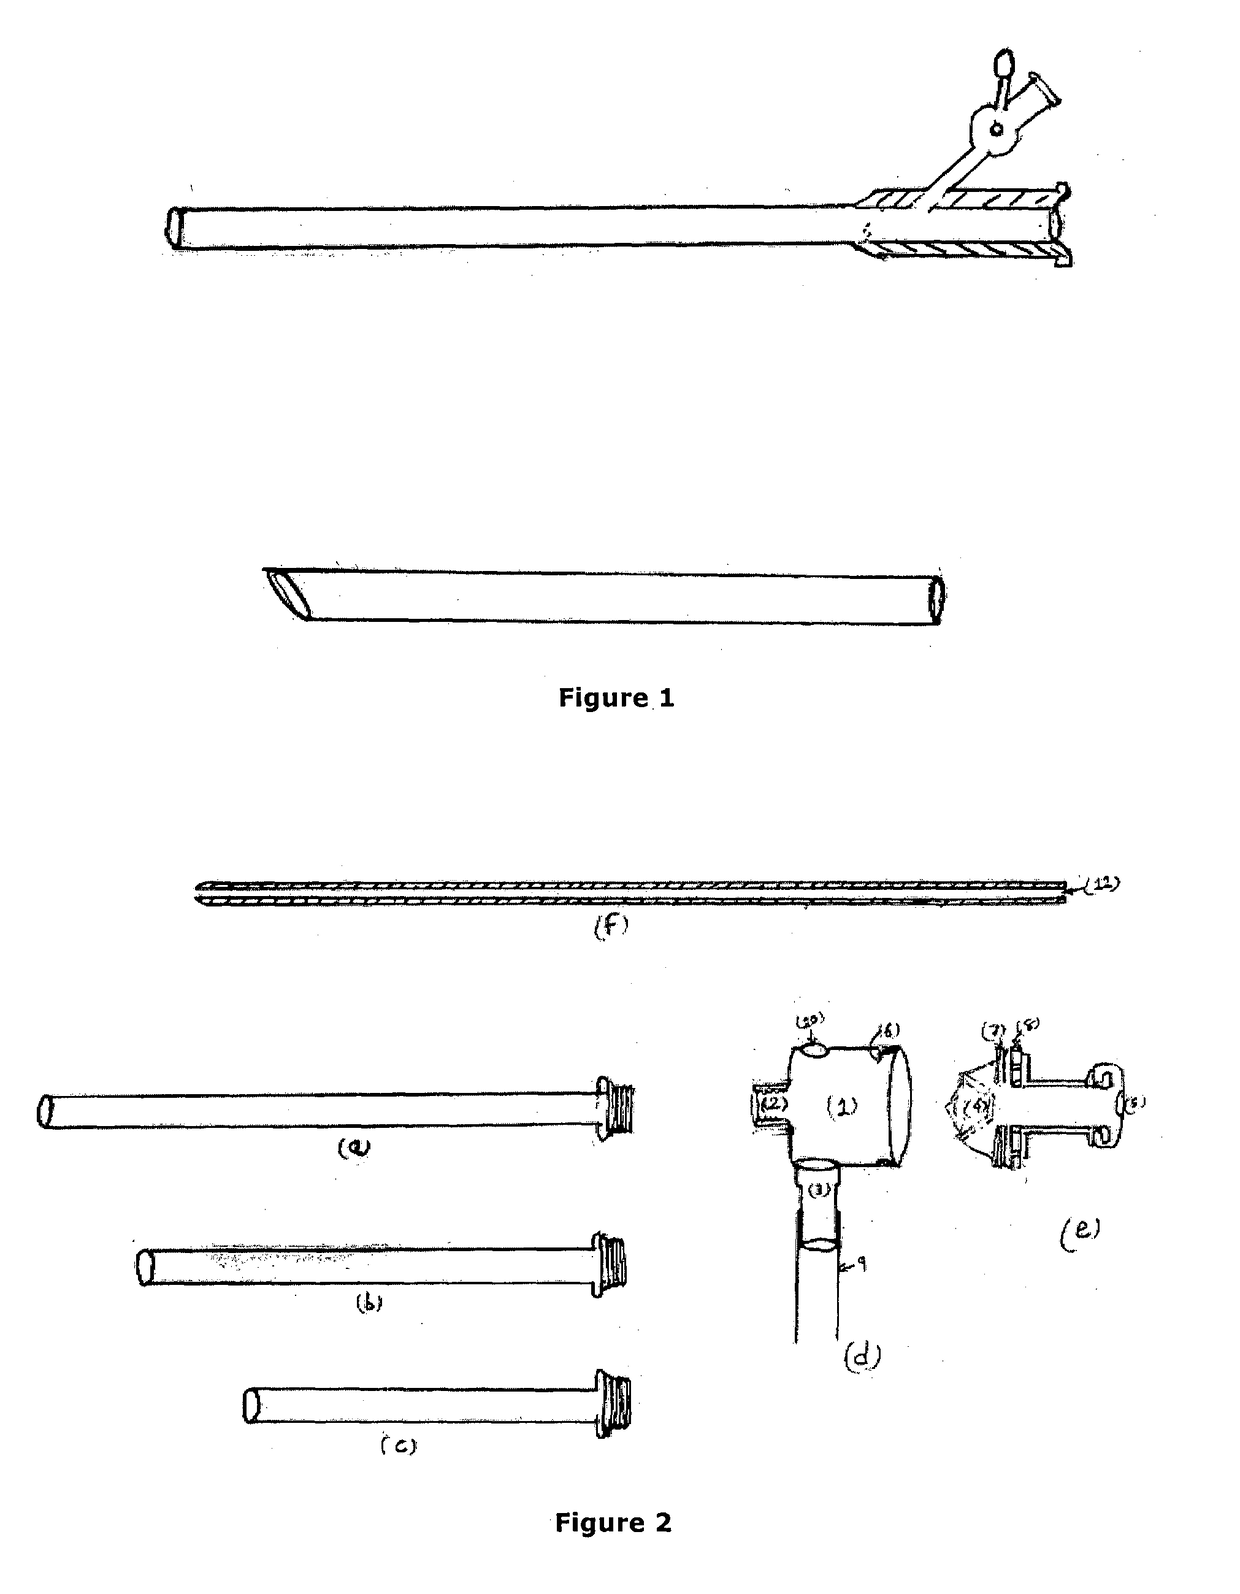 Sheath assembly and multihole catheter for different fields of endoscopic surgery involving suction, irrigation and material removal